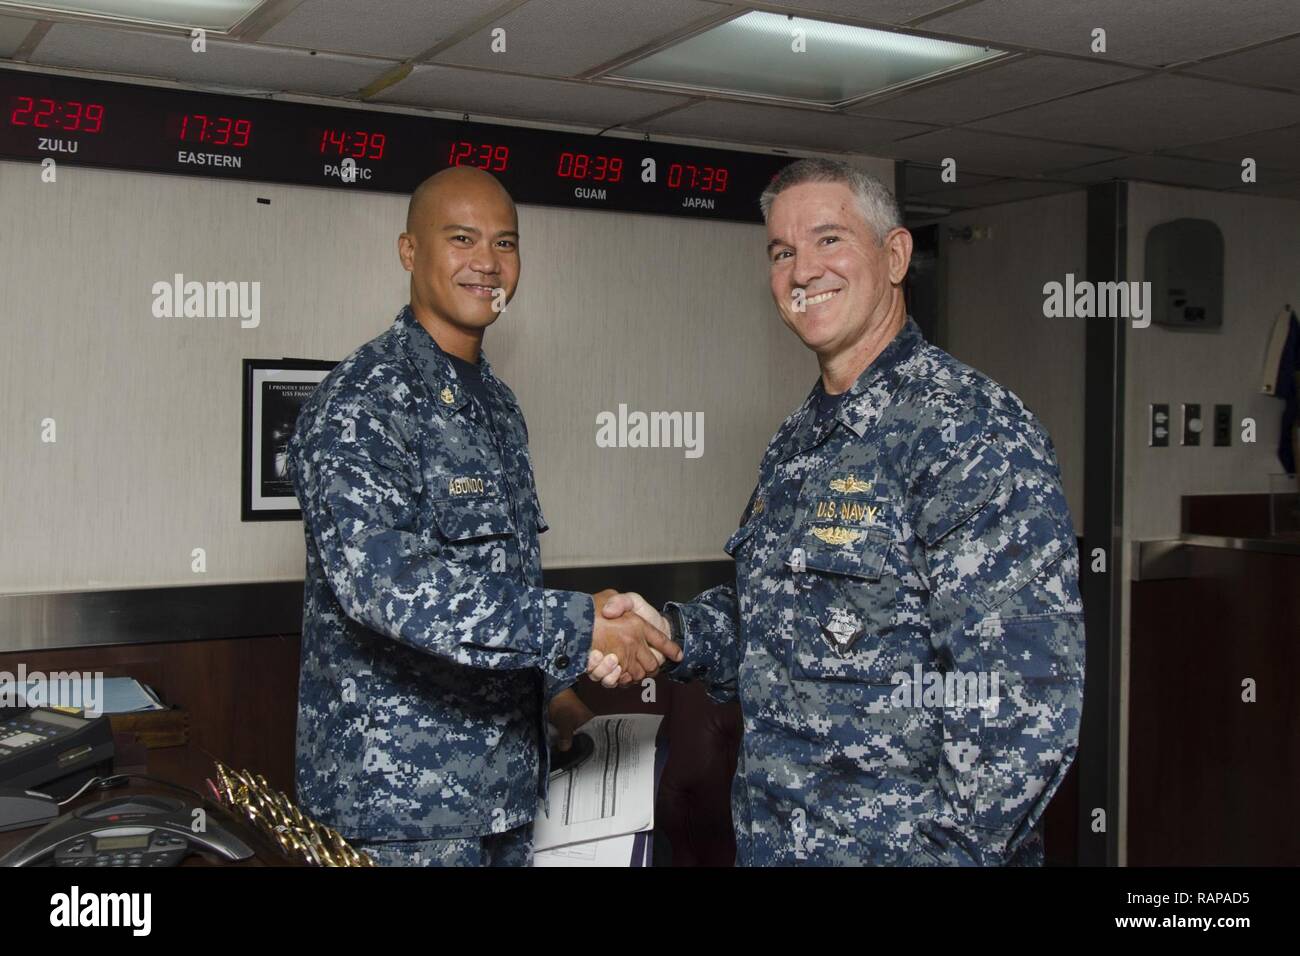 SANTA RITA, Guam - The submarine tender USS Frank Cable (AS 40) Executive Officer Cmdr. Ed Callahan congratulated Chief Damage Controlman Cyprus V. Abundo, native of Angeles City, Philippines, for his selection as the winner of the 2016 GEICO Military Service Award - Fire Safety and Prevention, Feb. 10.  Frank Cable, forward deployed to the island of Guam, conducts maintenance and support of submarines and surface vessels deployed to the U.S. 5th and 7th Fleet area of operations. Stock Photo